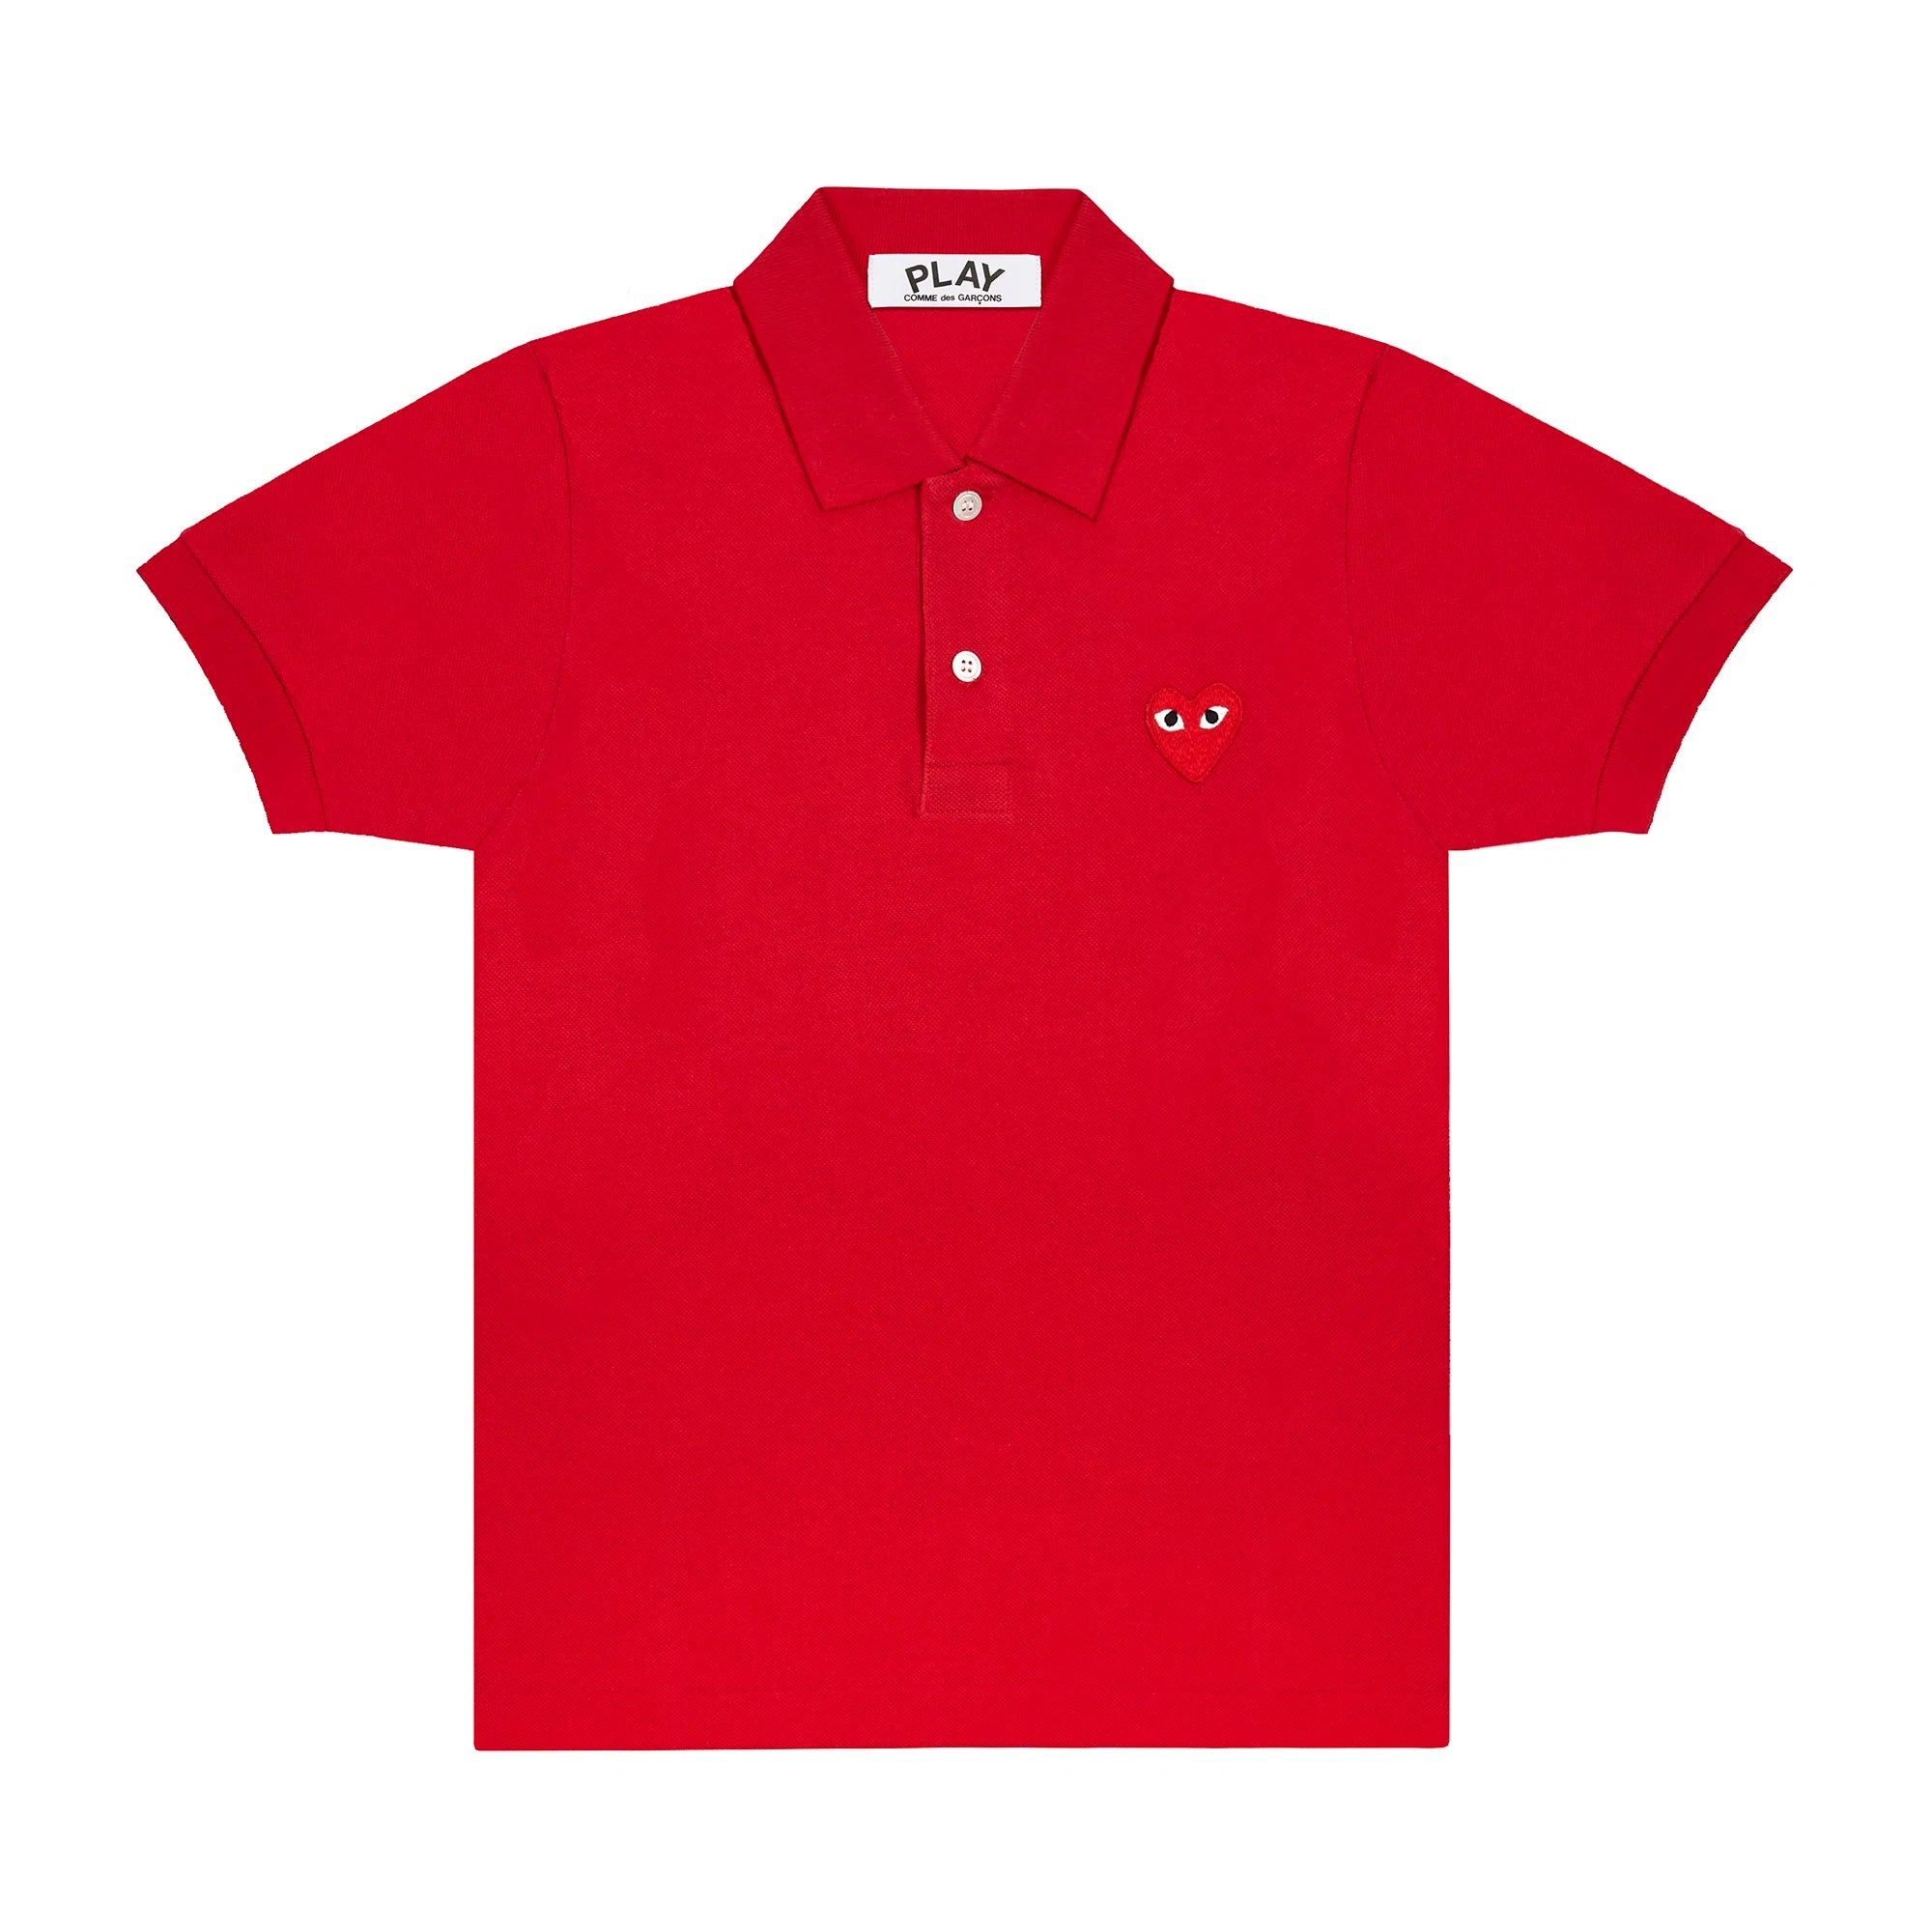 PLAY Polo Red Emblem (Red)